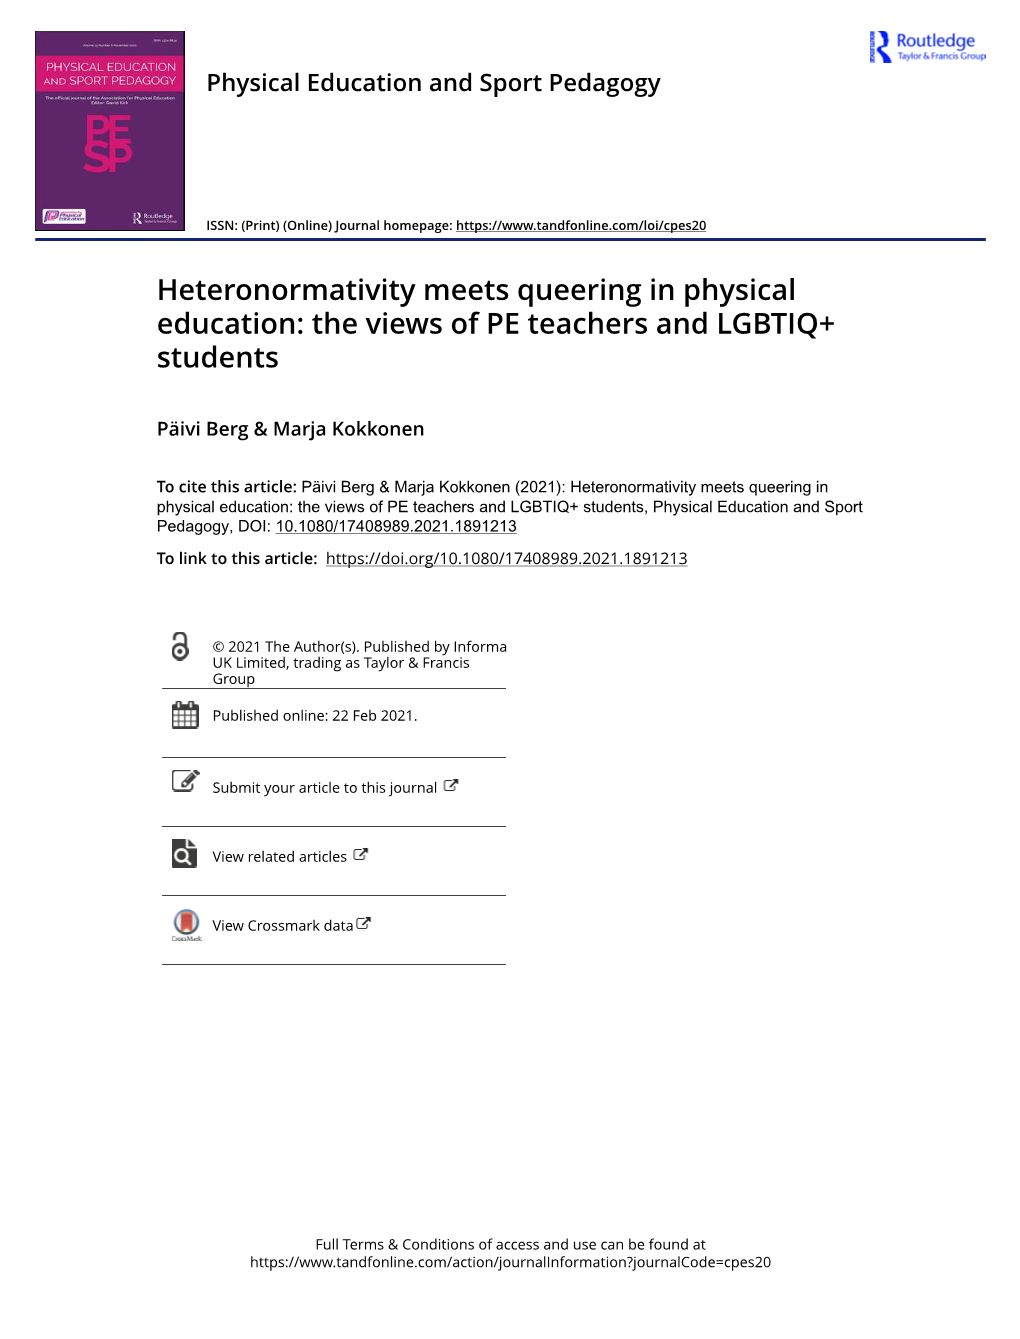 Heteronormativity Meets Queering in Physical Education: the Views of PE Teachers and LGBTIQ+ Students